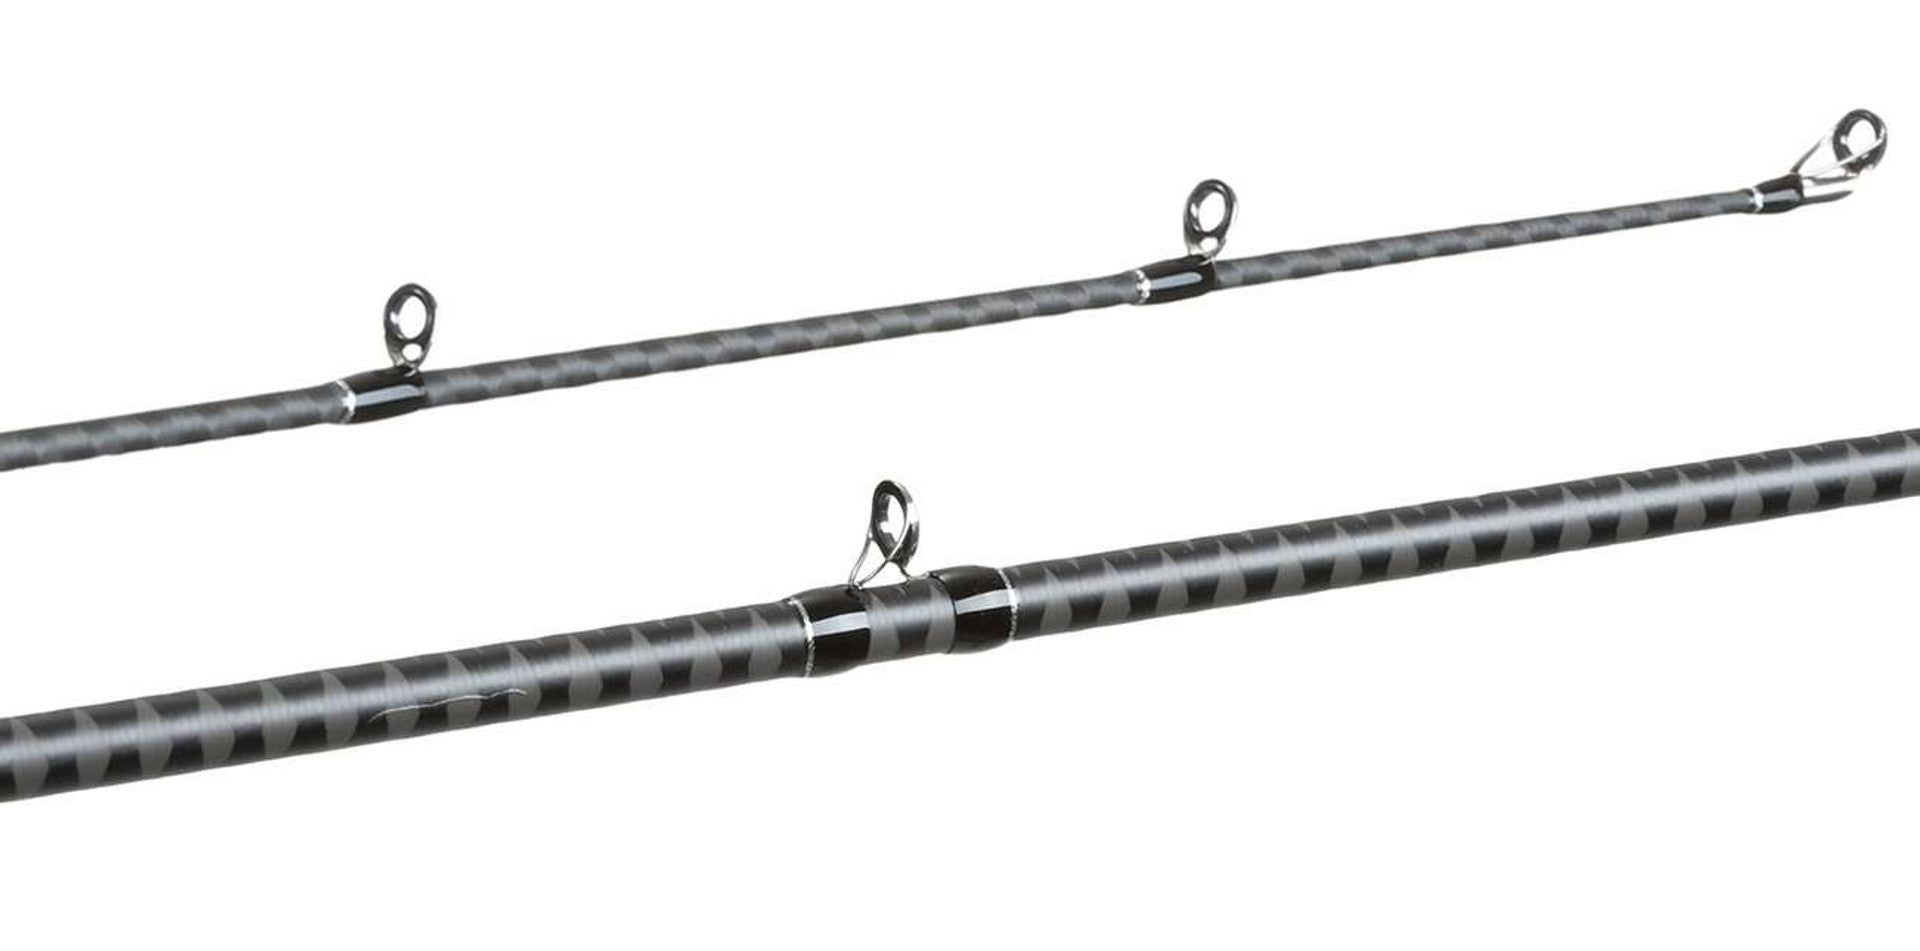 Shimano Expride B Casting Rods EXC72MHGB - Glass